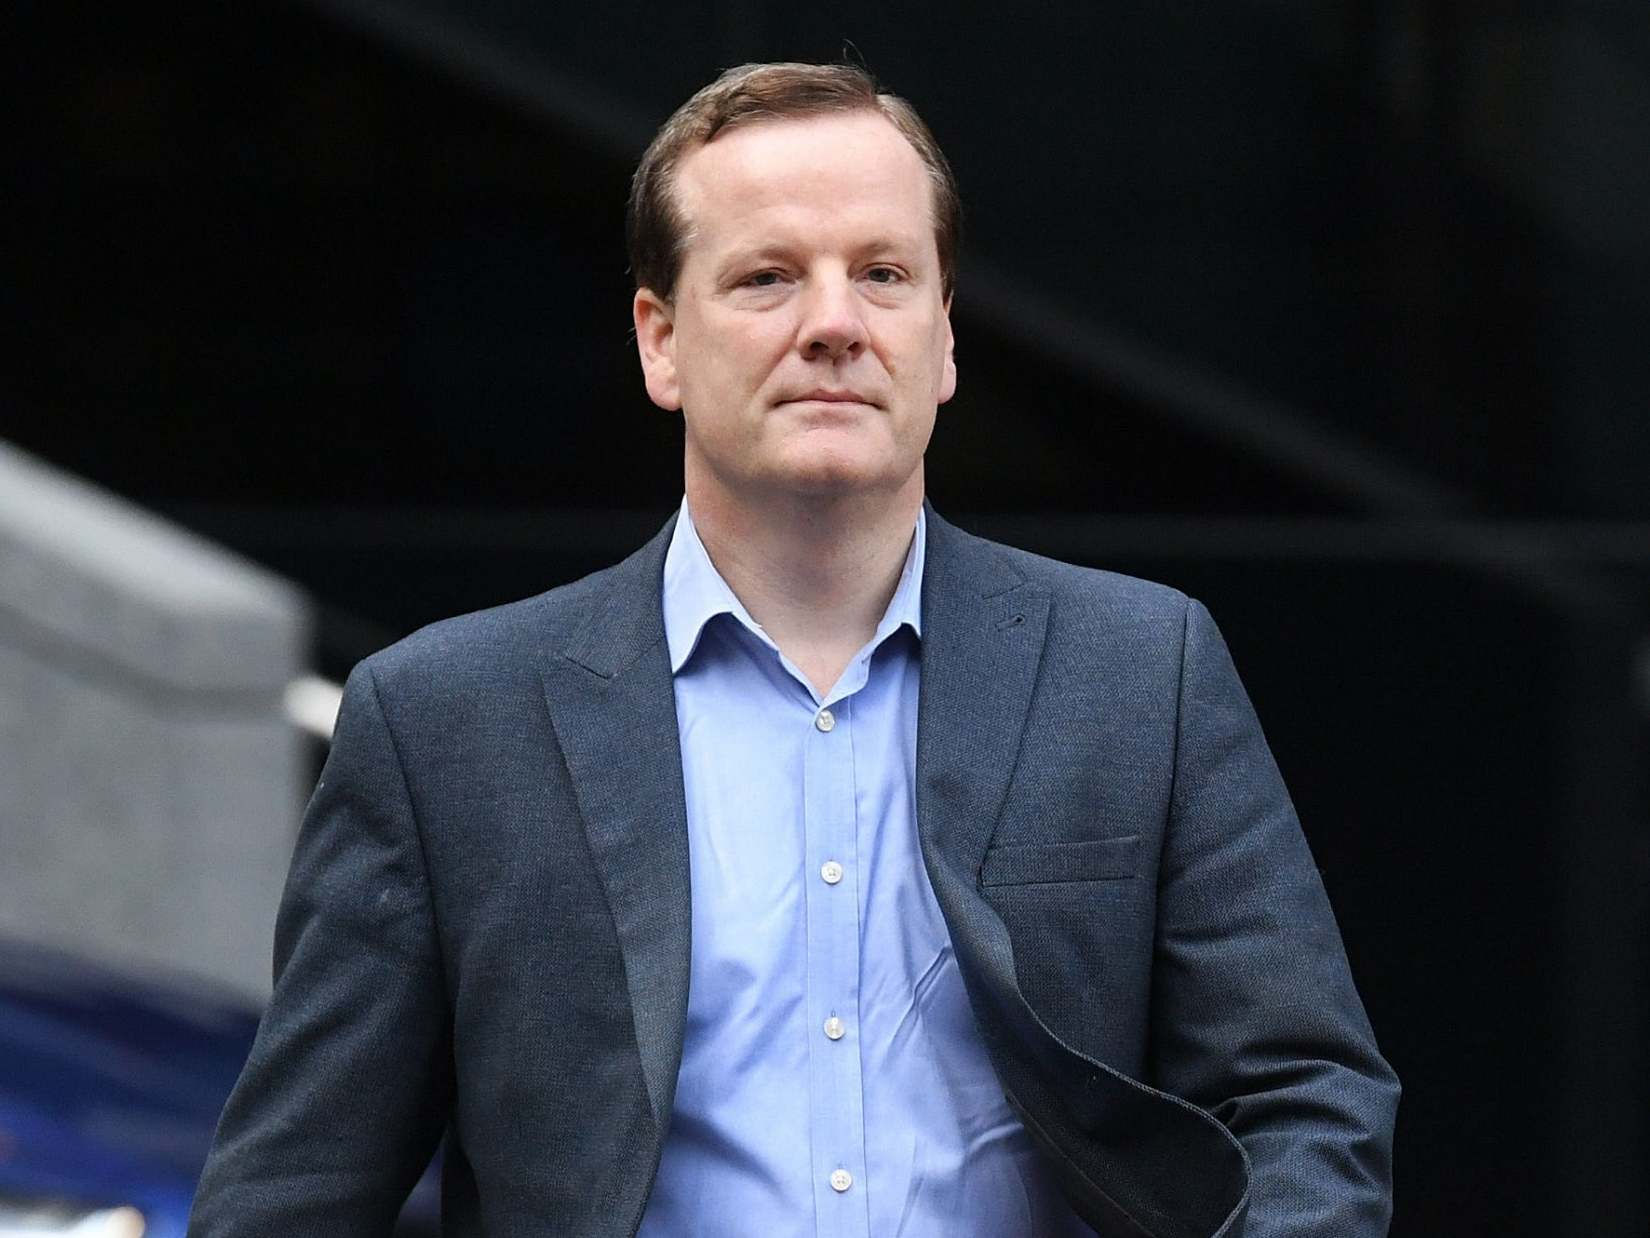 Charlie Elphicke is unable to pay a £35,000 fine